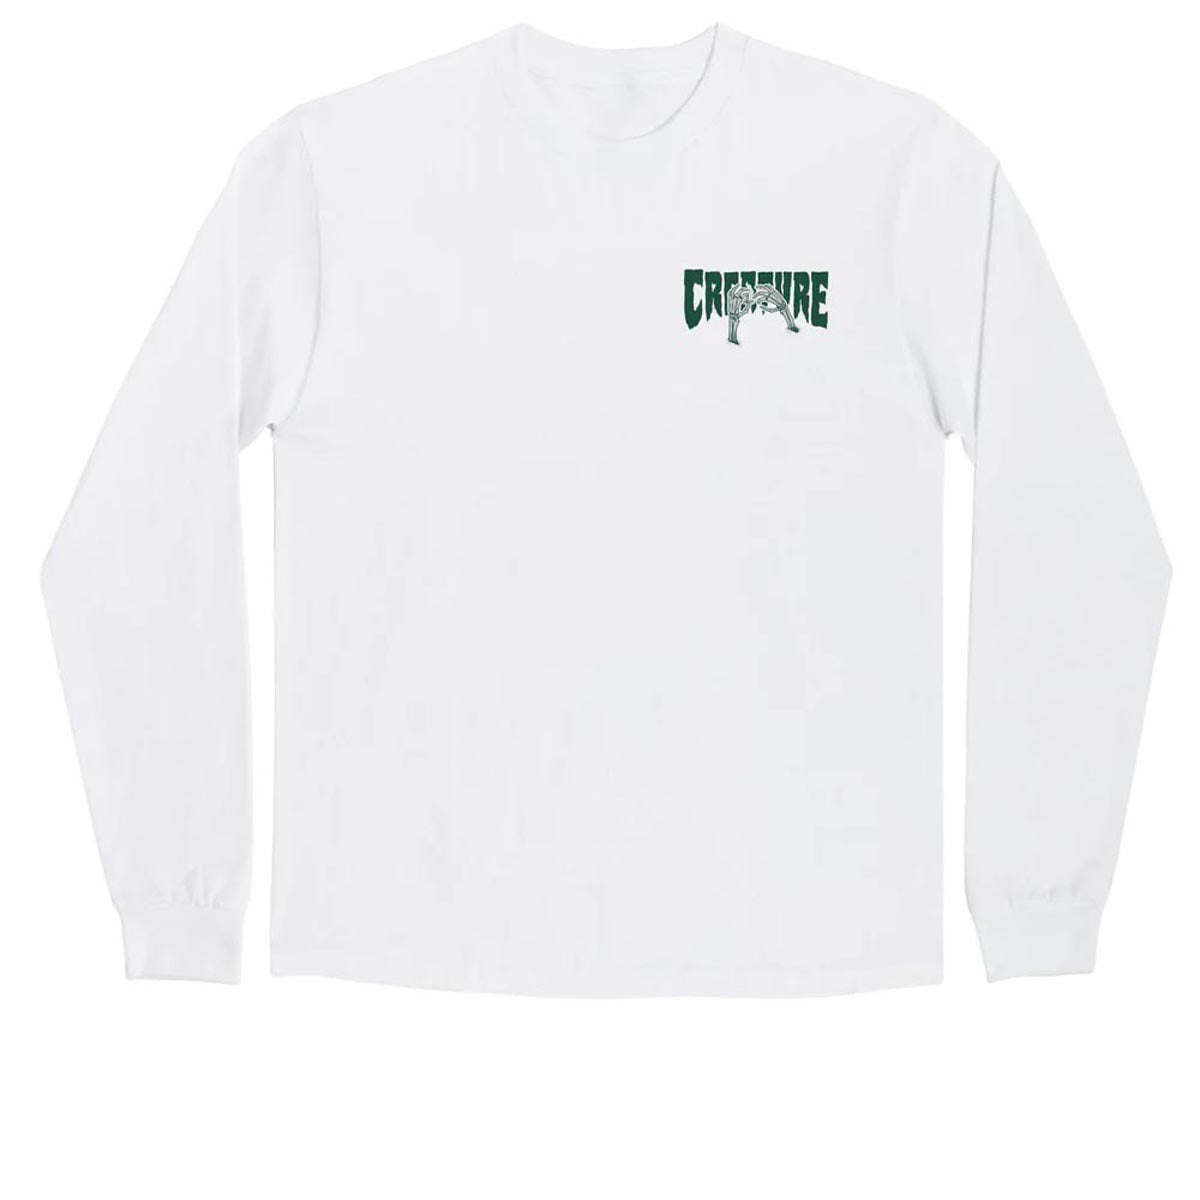 Creature Grave Roller Long Sleeve T-Shirt - White image 2